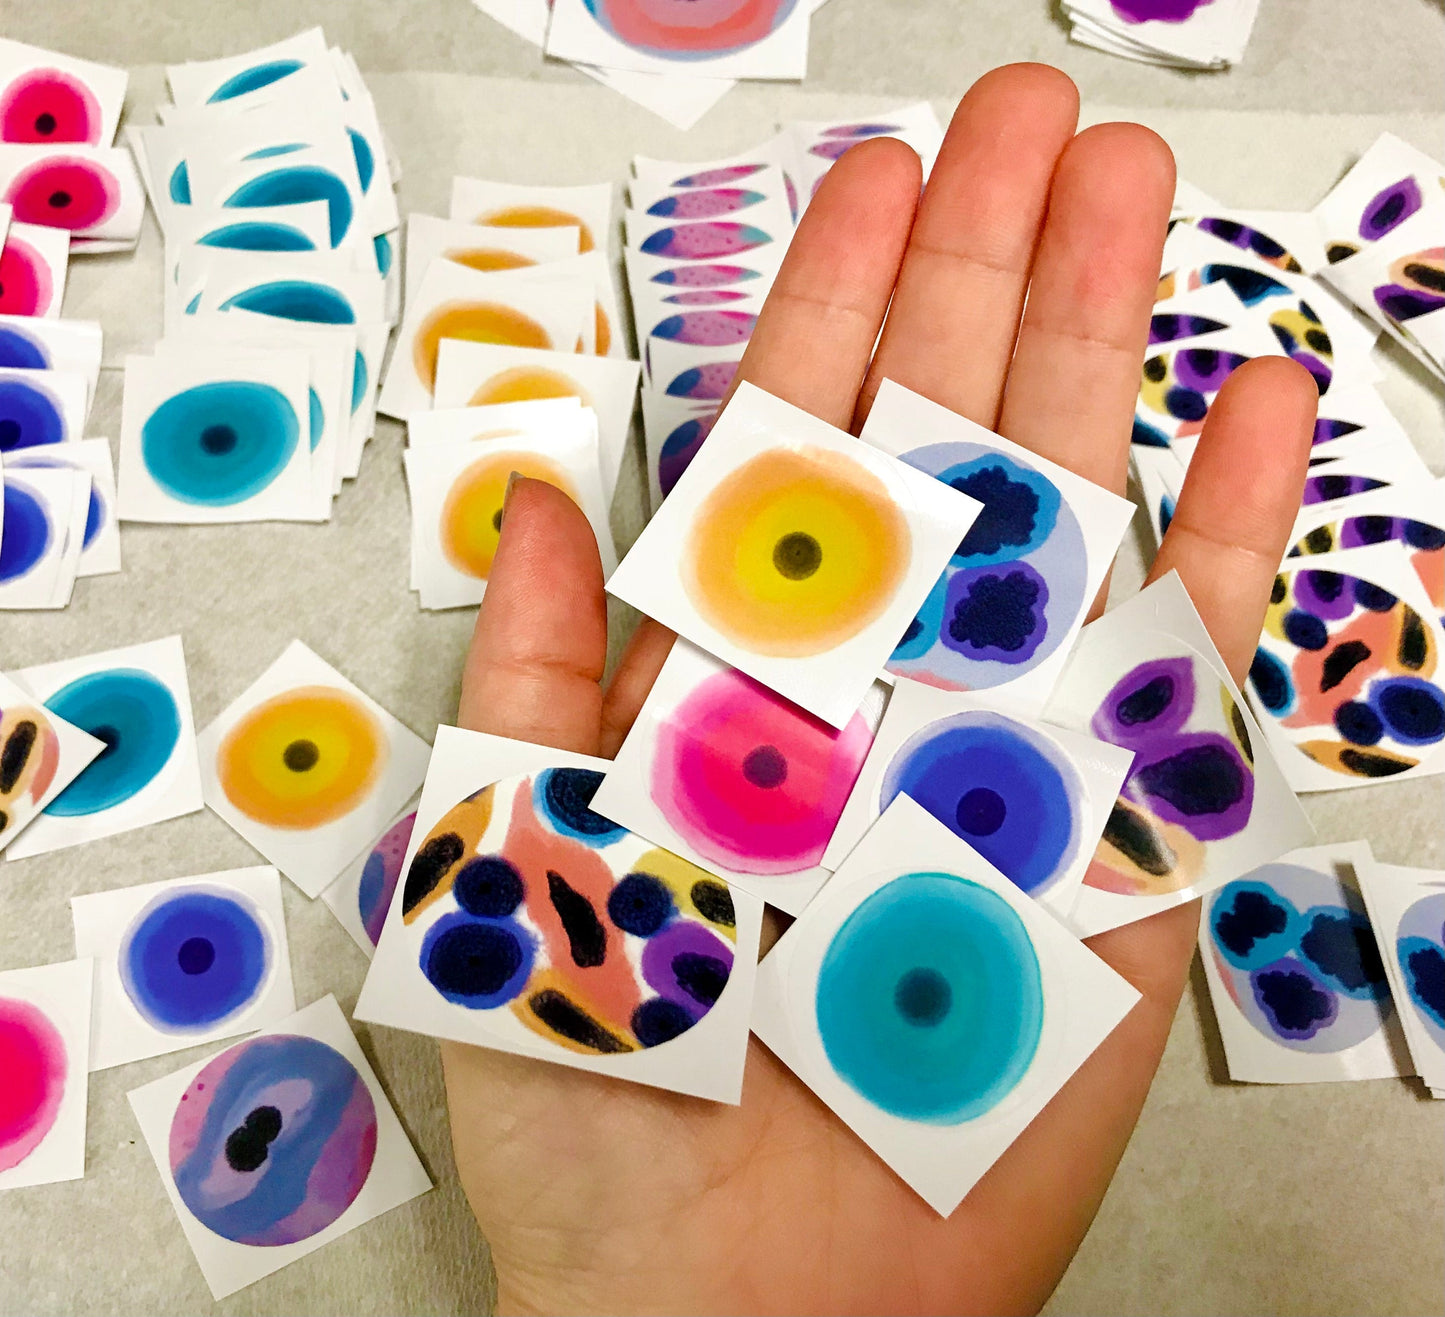 Stickers group of 3, 6 or 9 colorful skin cells.  Benign and dysplasia squamous cell stickers.  You will get a mixture of the stickers in the pictures.  You will get a good mixture of the cell stickers in the pictures.